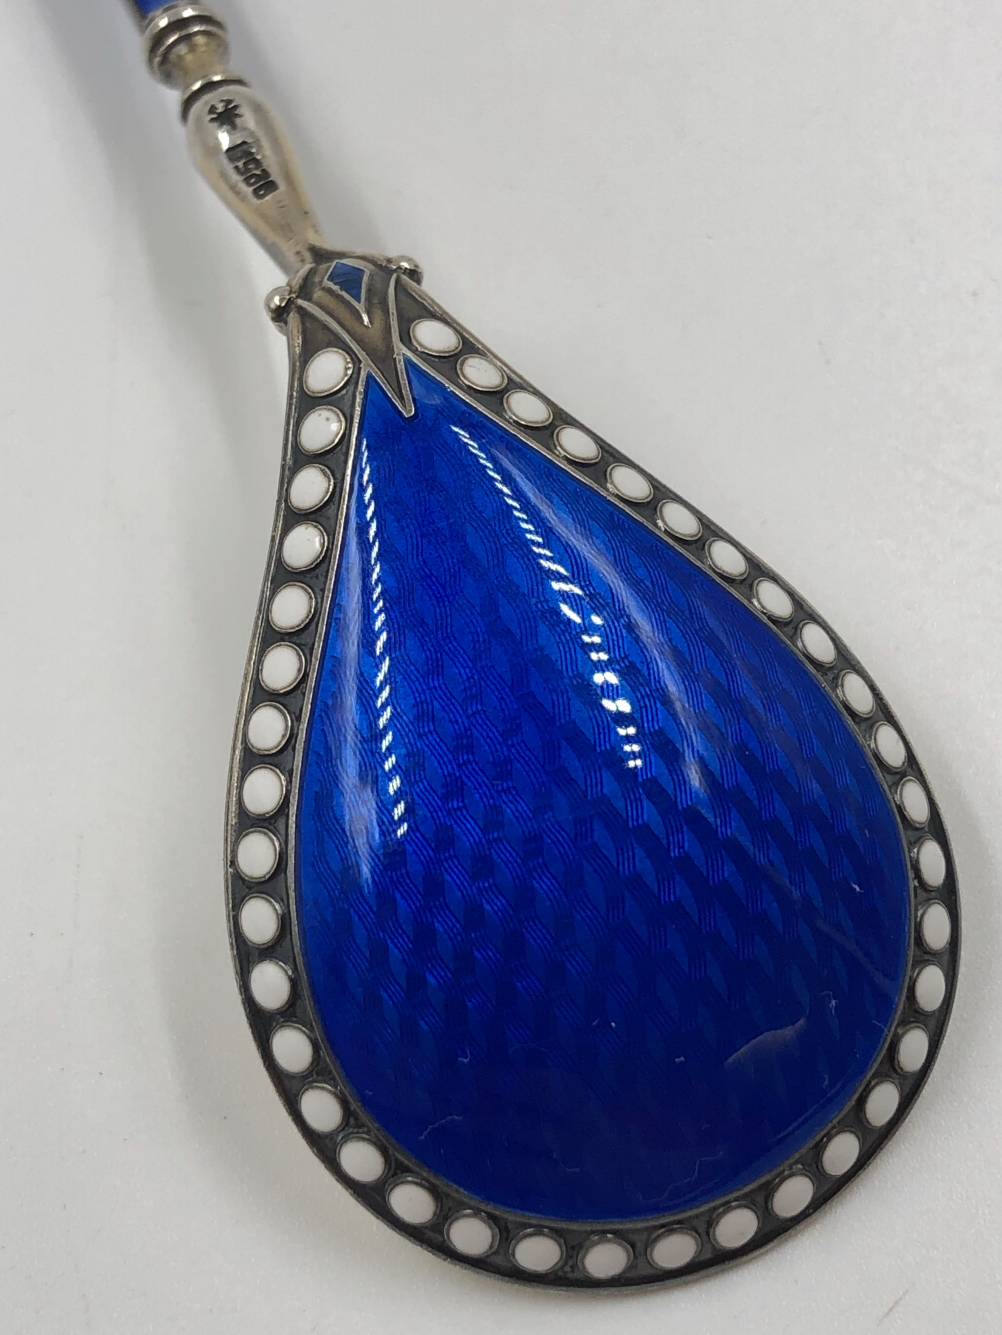 A NORWEGIAN 925 SILVER SPOON BASSE TAILLE ENAMELLED IN BLUE, THE BACK OF THE BOWL EDGED WITH WHITE - Image 3 of 11